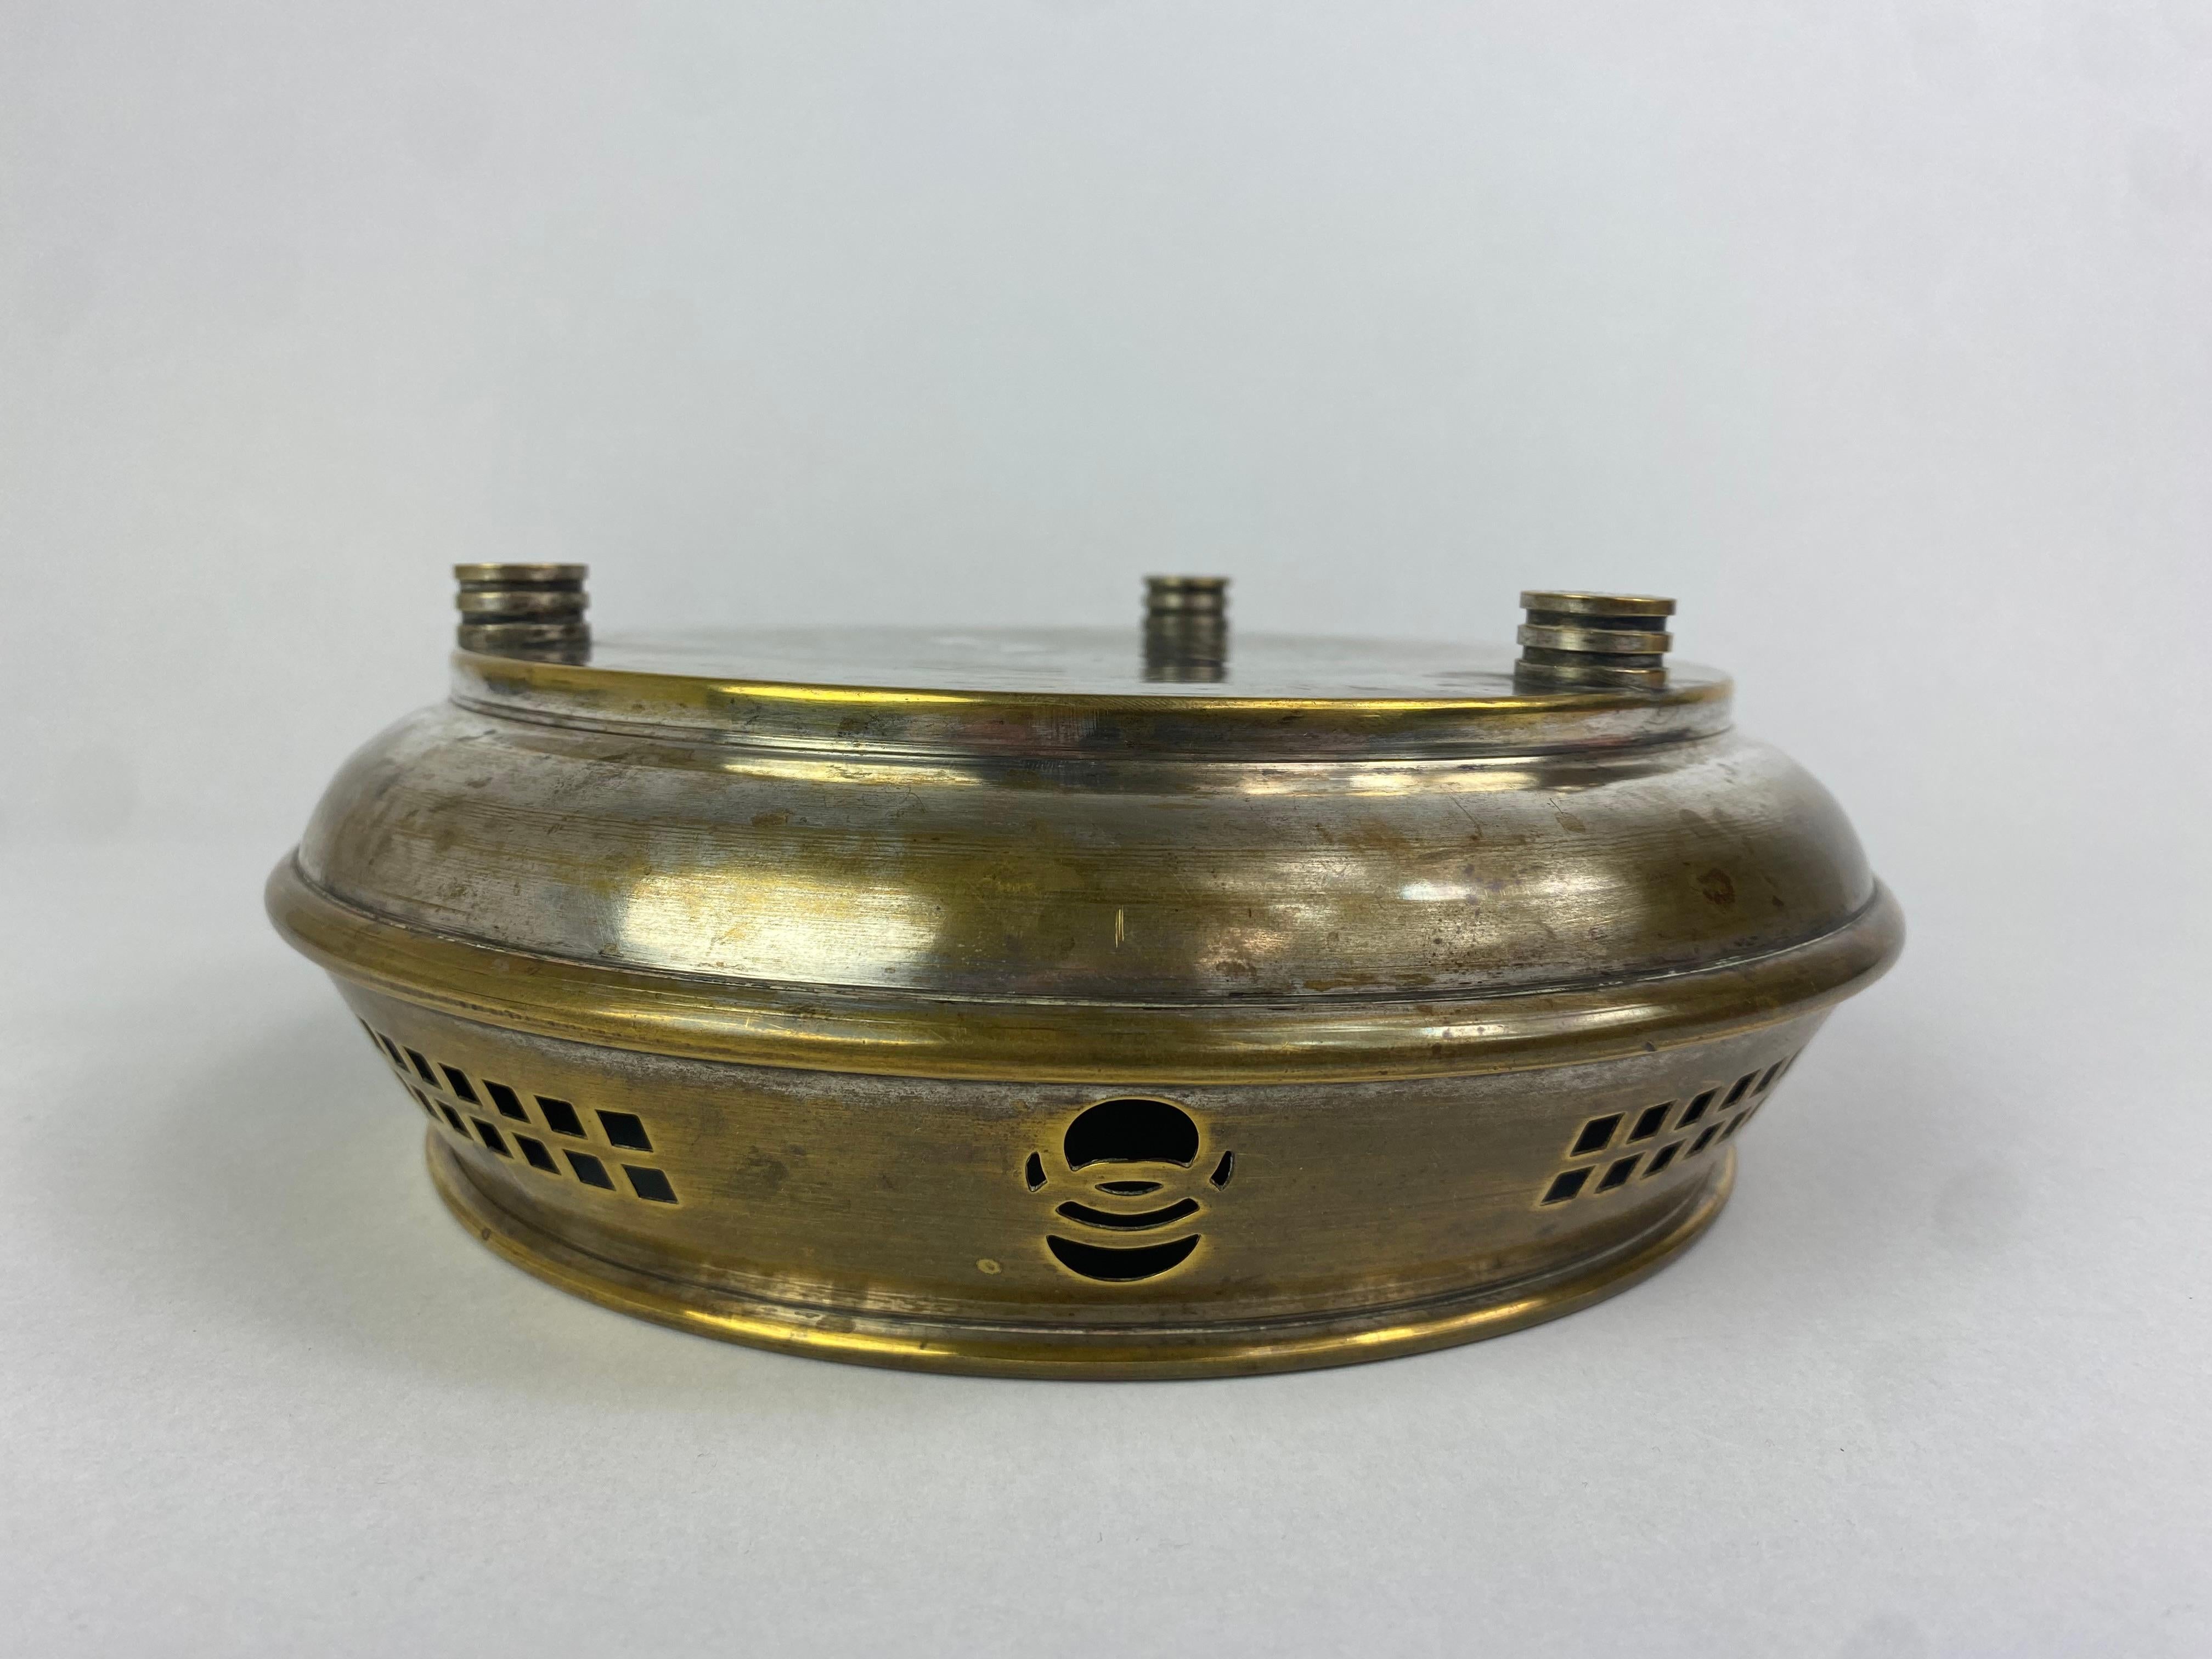 Austrian Secession brass bowl by Jutta Sika and Kolo Moser For Sale